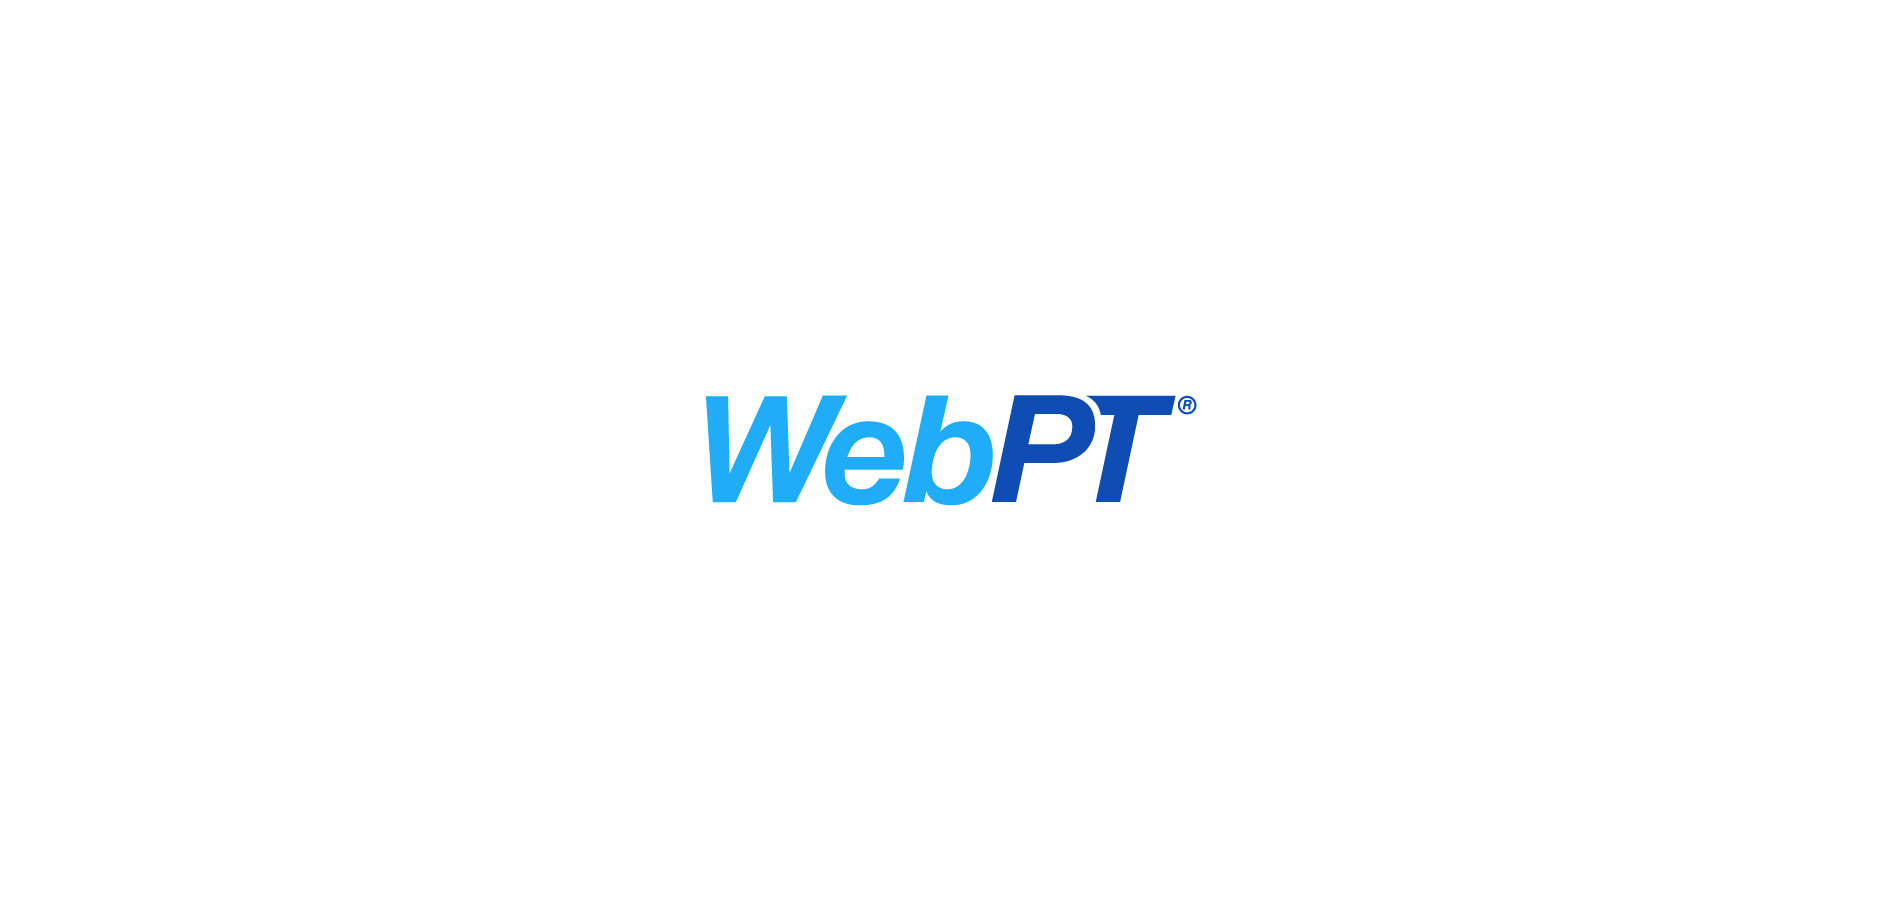 WebPT Receives Top Rated Award from TrustRadius for Exceptional Customer Satisfaction Ratings